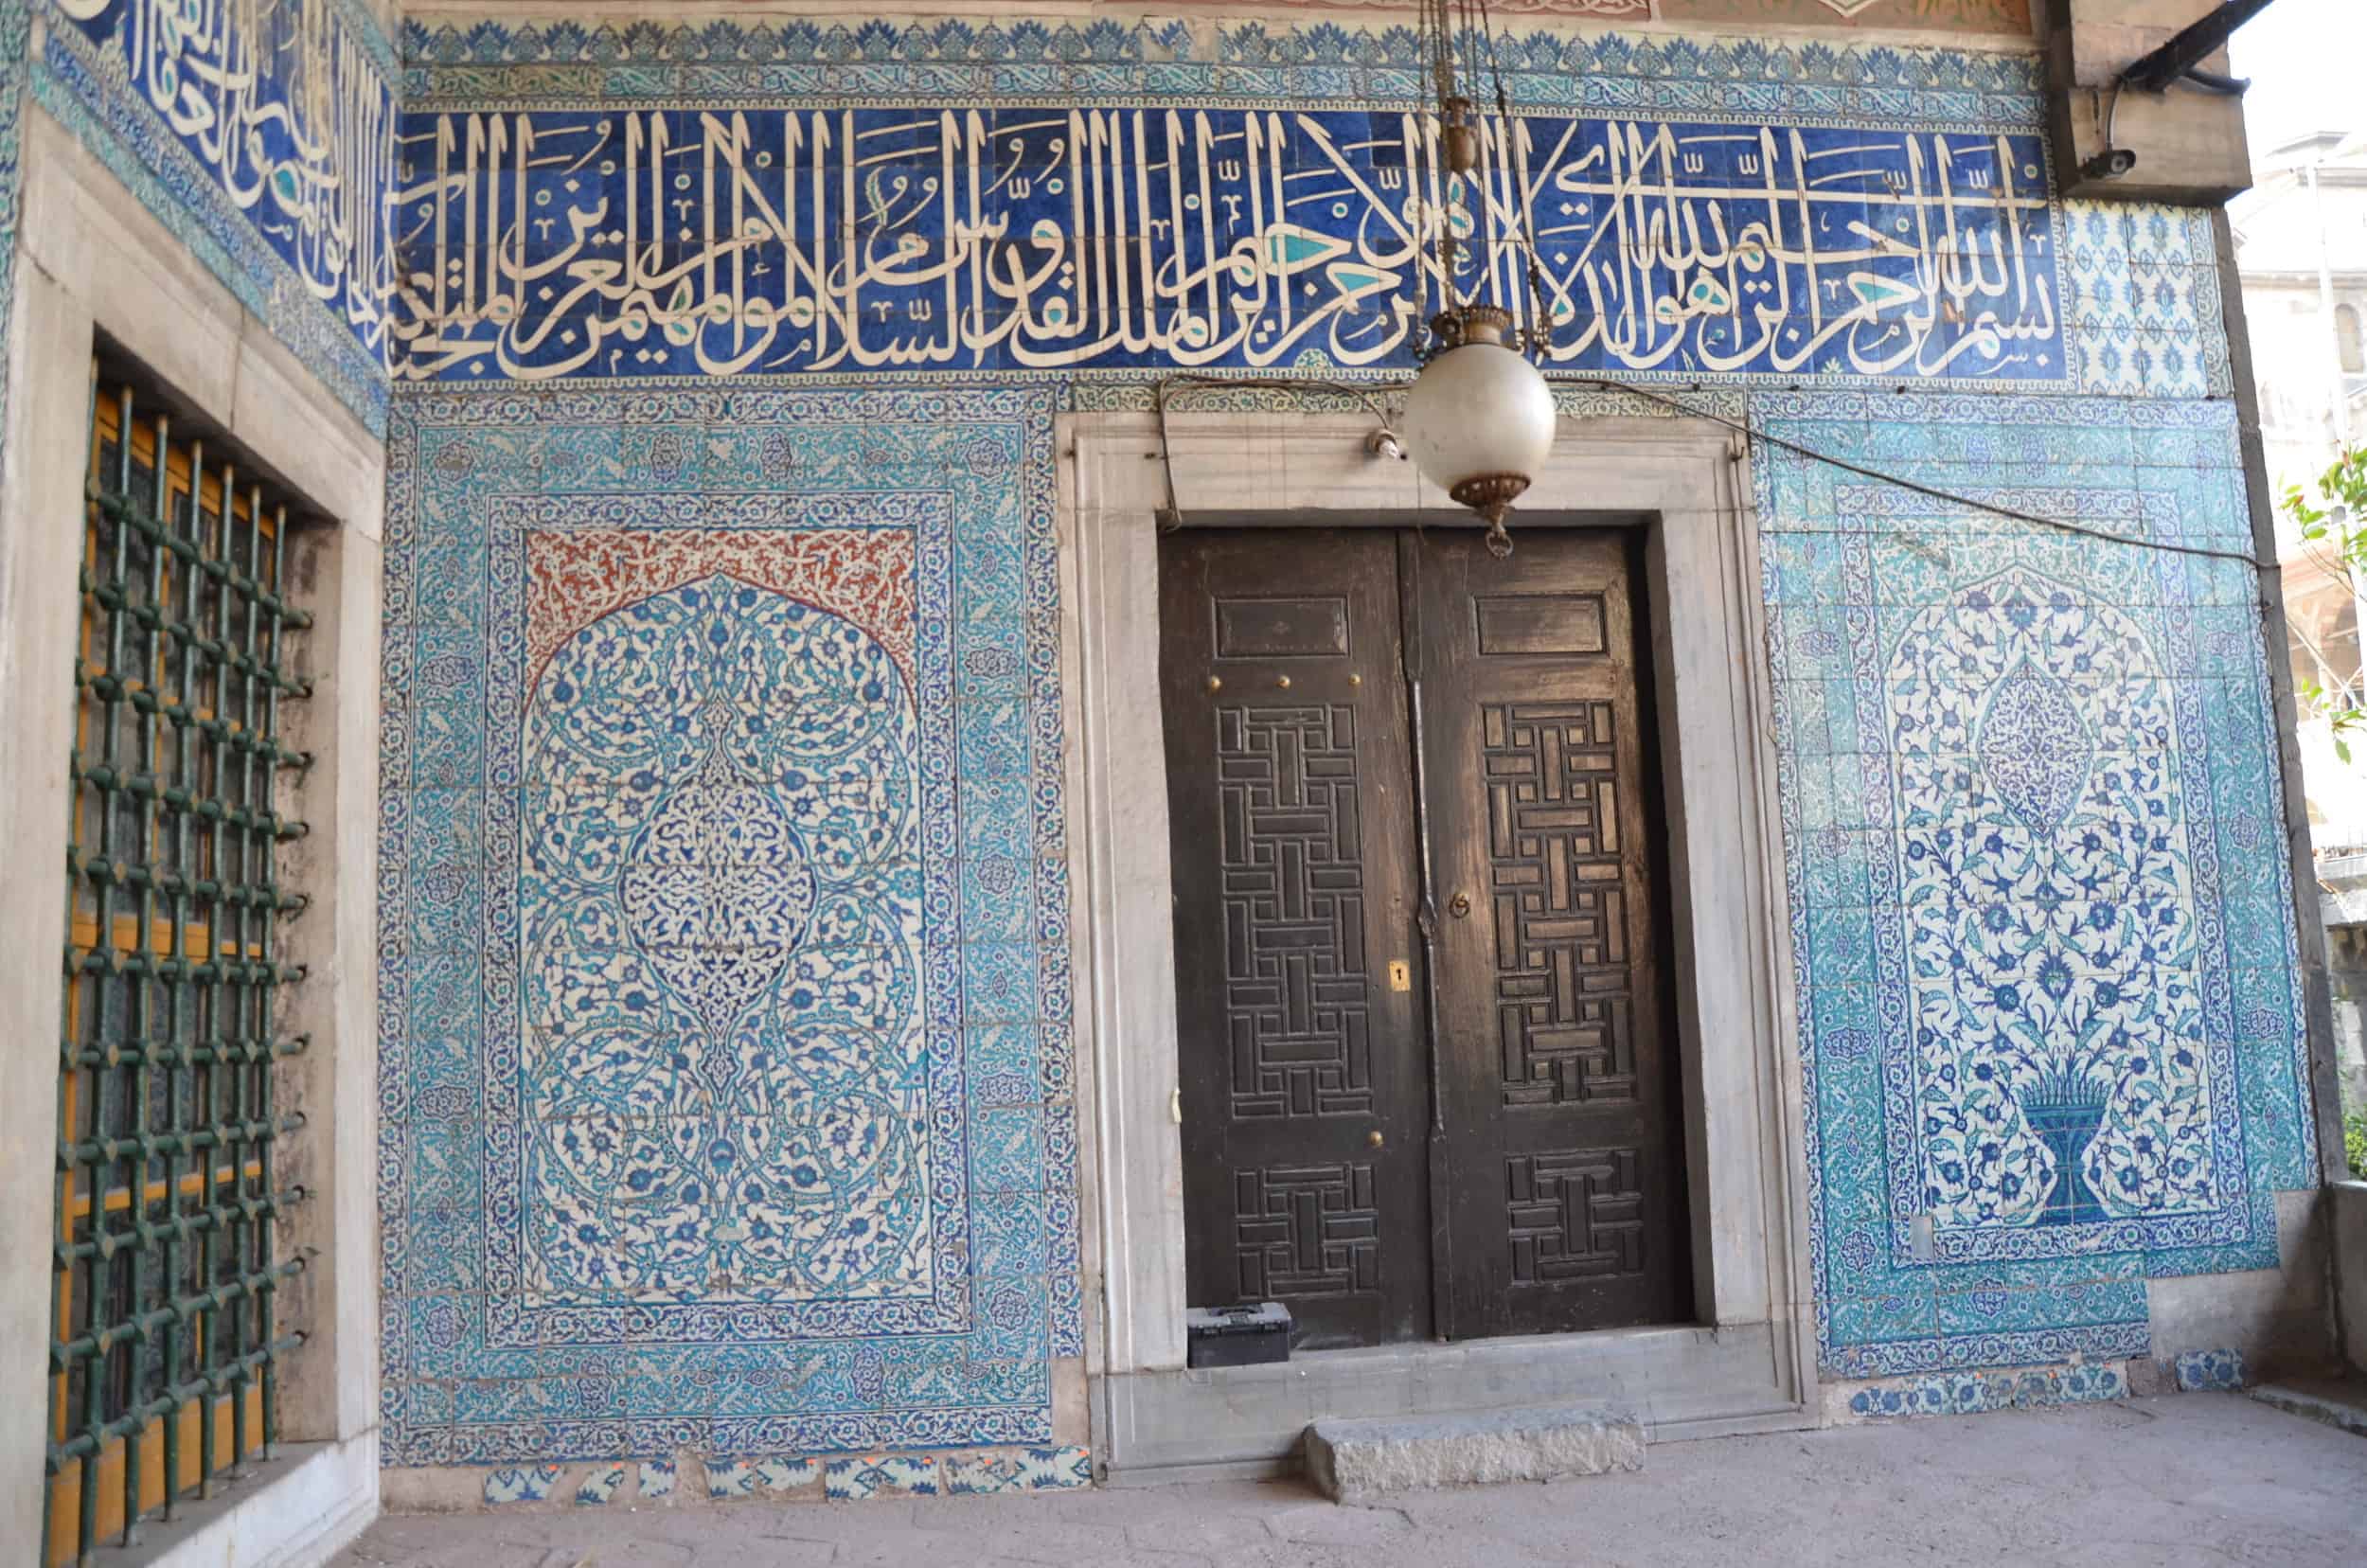 Iznik tiles on the porch of the tomb of Turhan Hatice Sultan at the New Mosque complex in Eminönü, Istanbul, Turkey